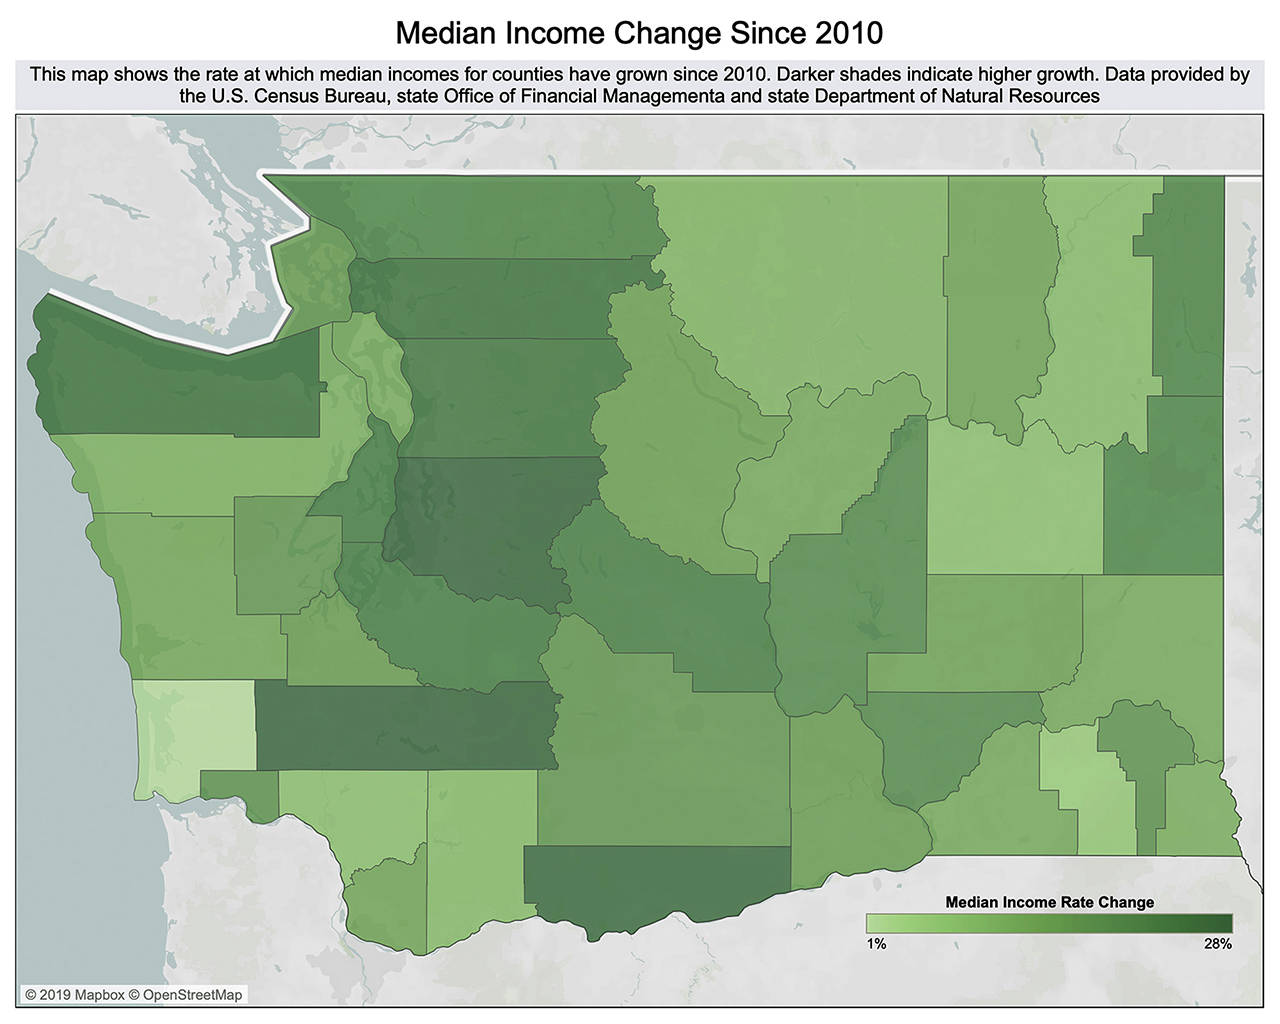 Washington state median income growth map from least amount (lightest) to the most.